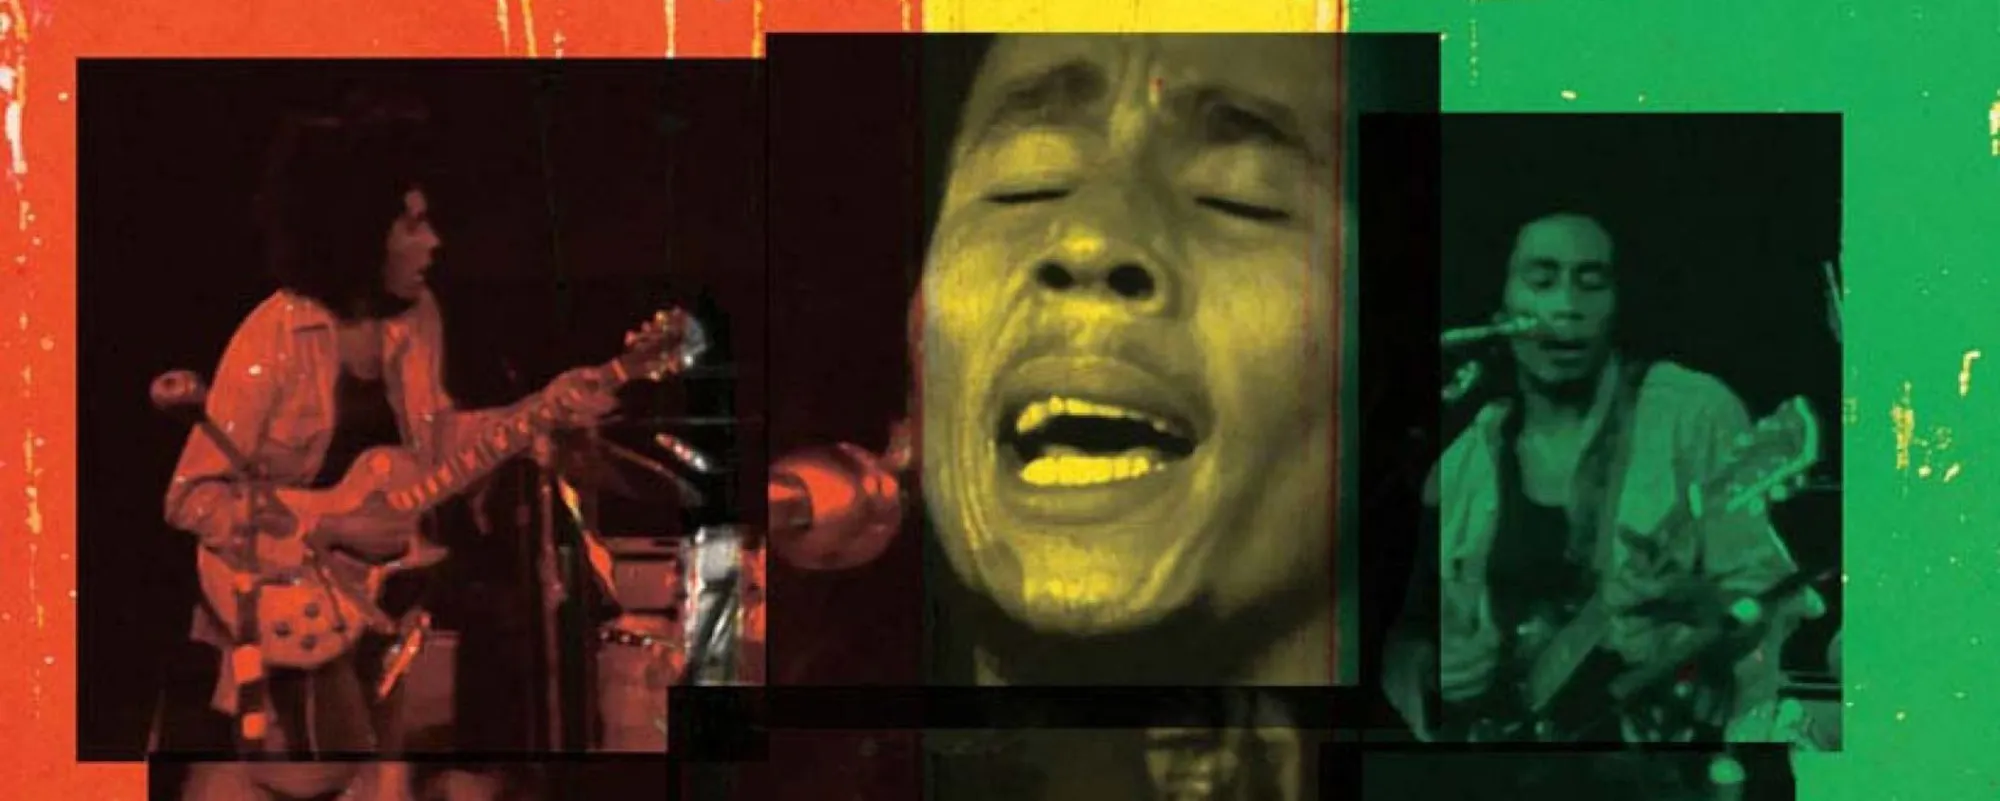 Bob Marley and the Wailers' 'Catch a Fire' to get 50th anniversary editions  - Goldmine Magazine: Record Collector & Music Memorabilia